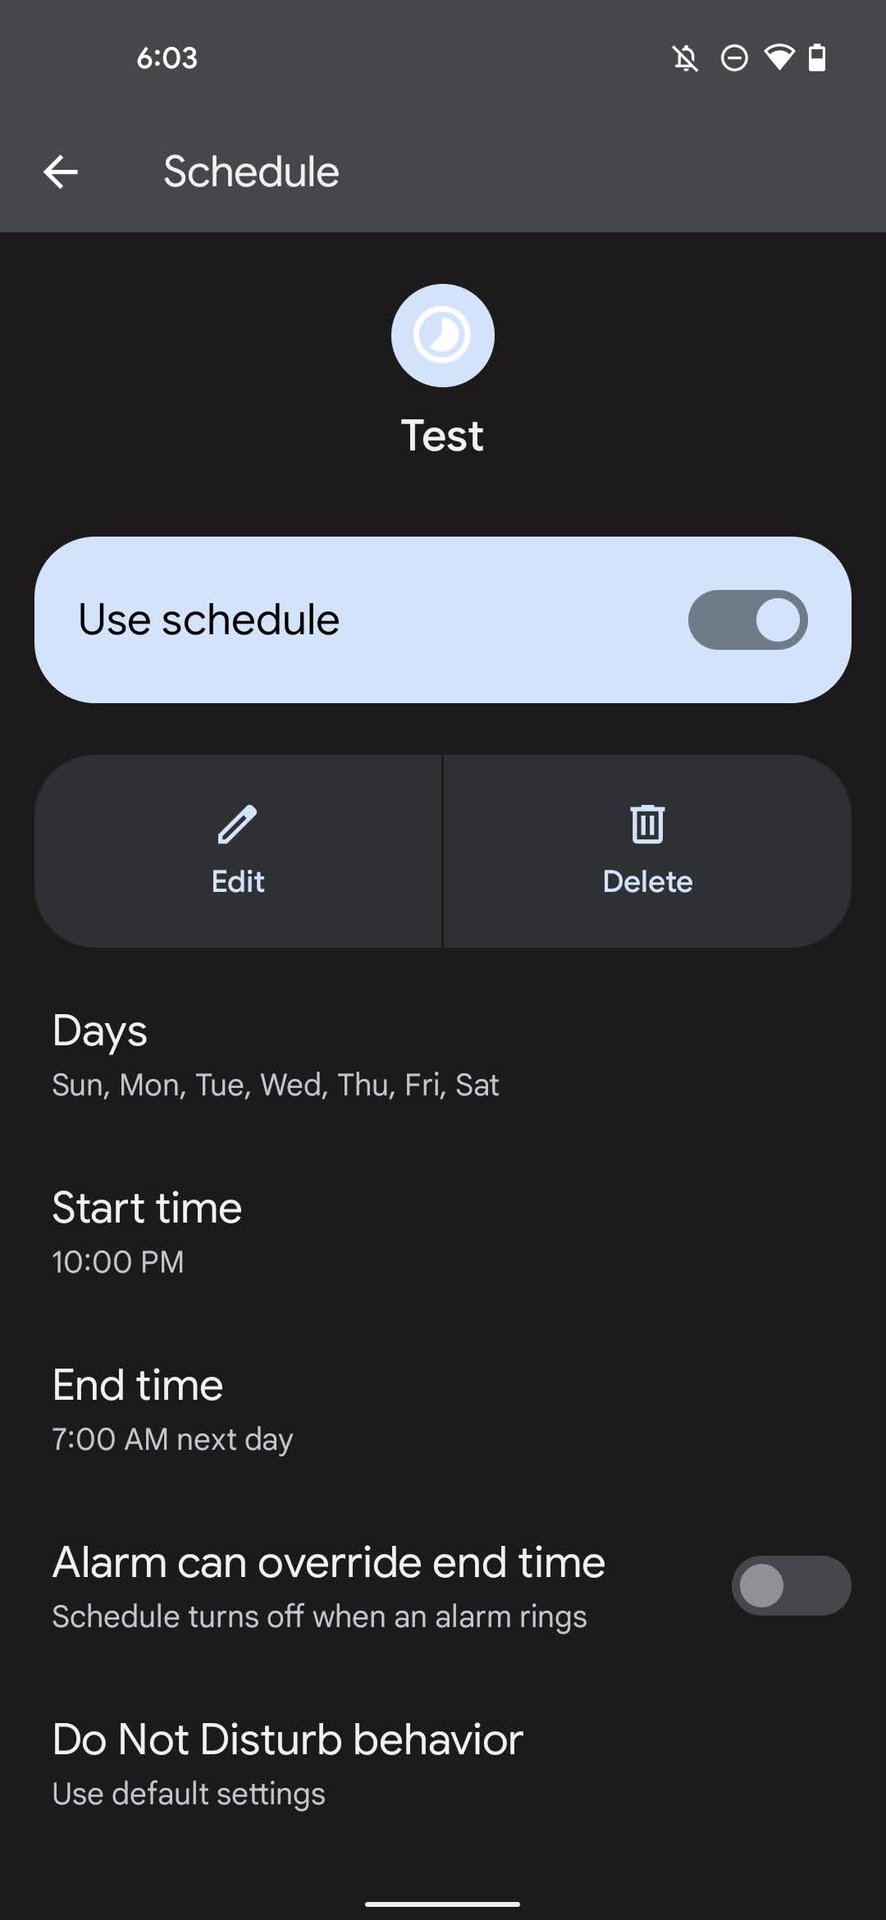 How to create a Do Not Disturb schedule 6